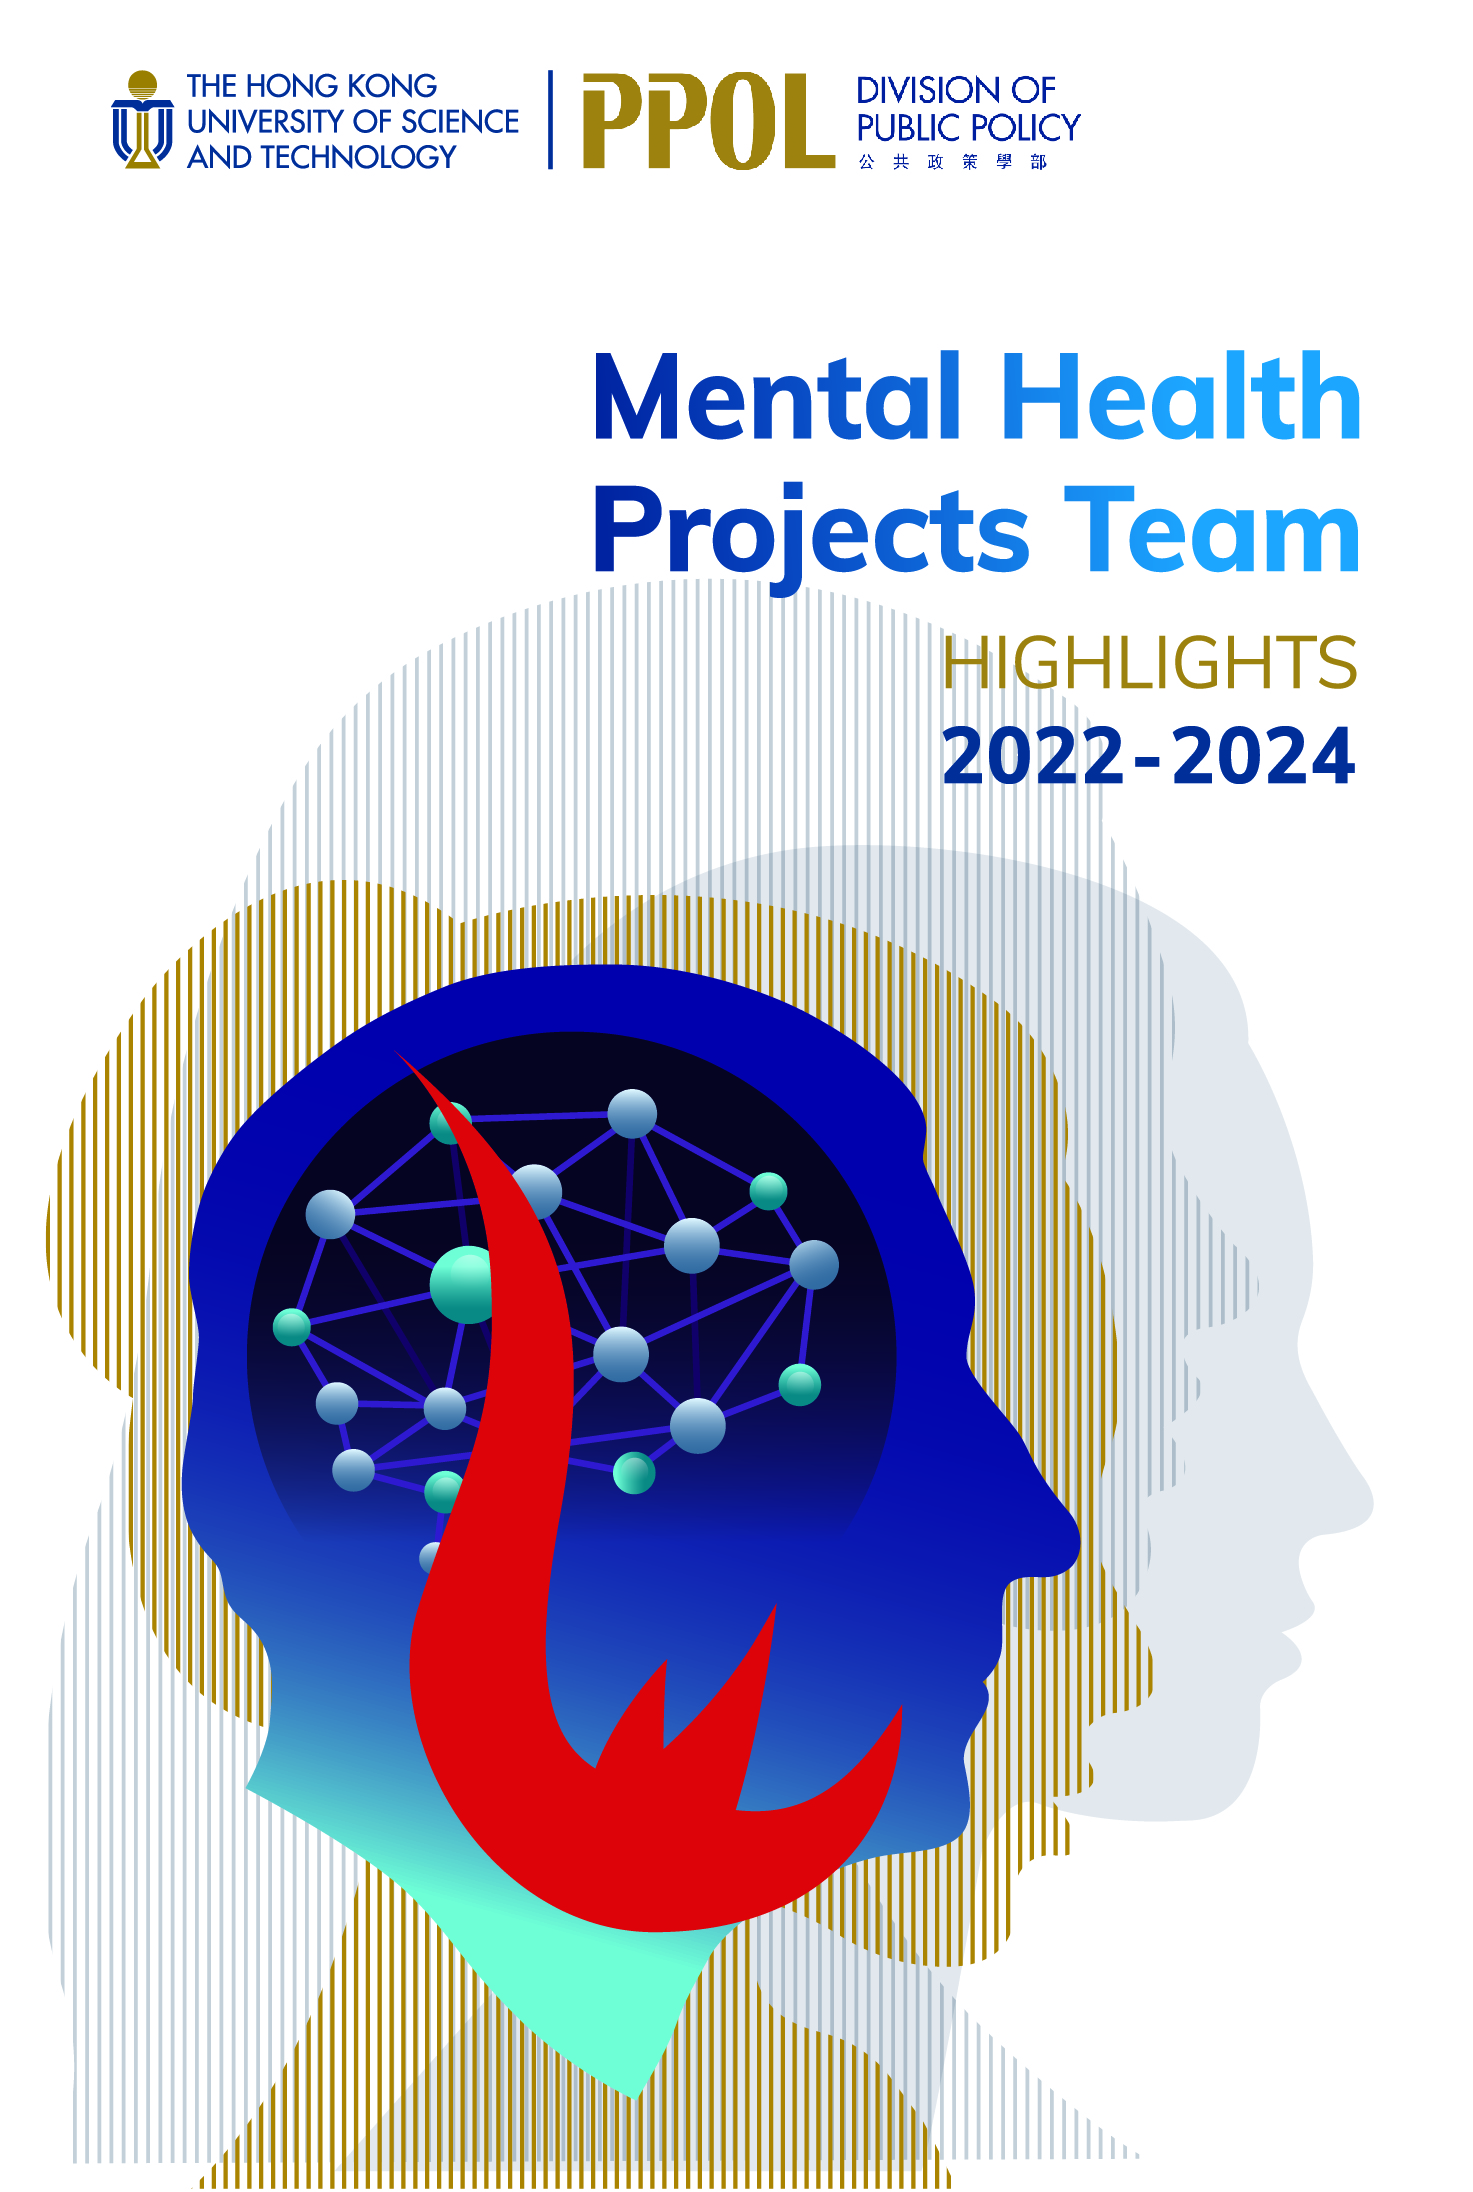 Mental Health Projects Team Highlights 2022-2024